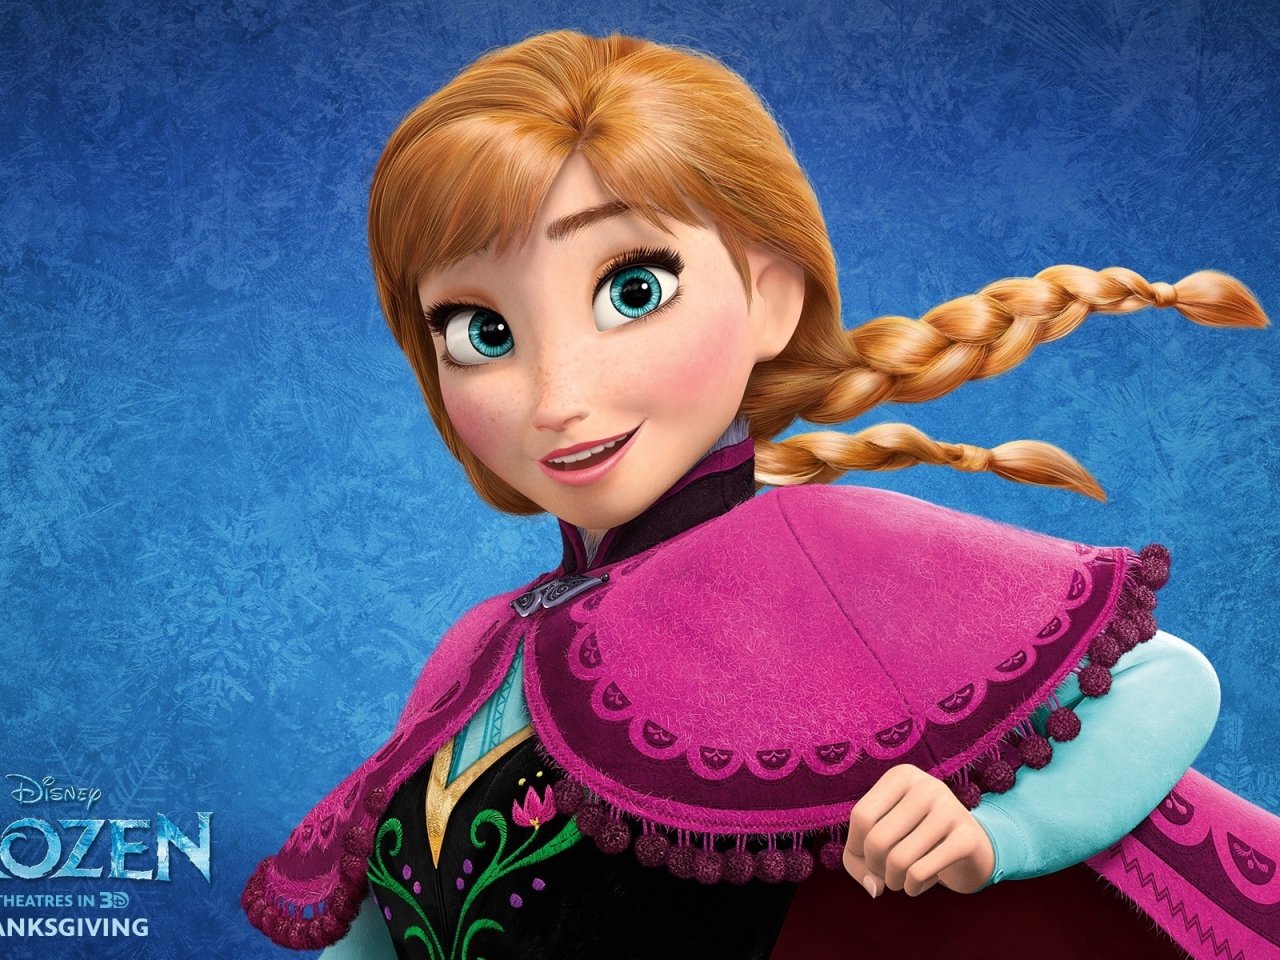 Frozen Movie Character for 1280 x 960 resolution